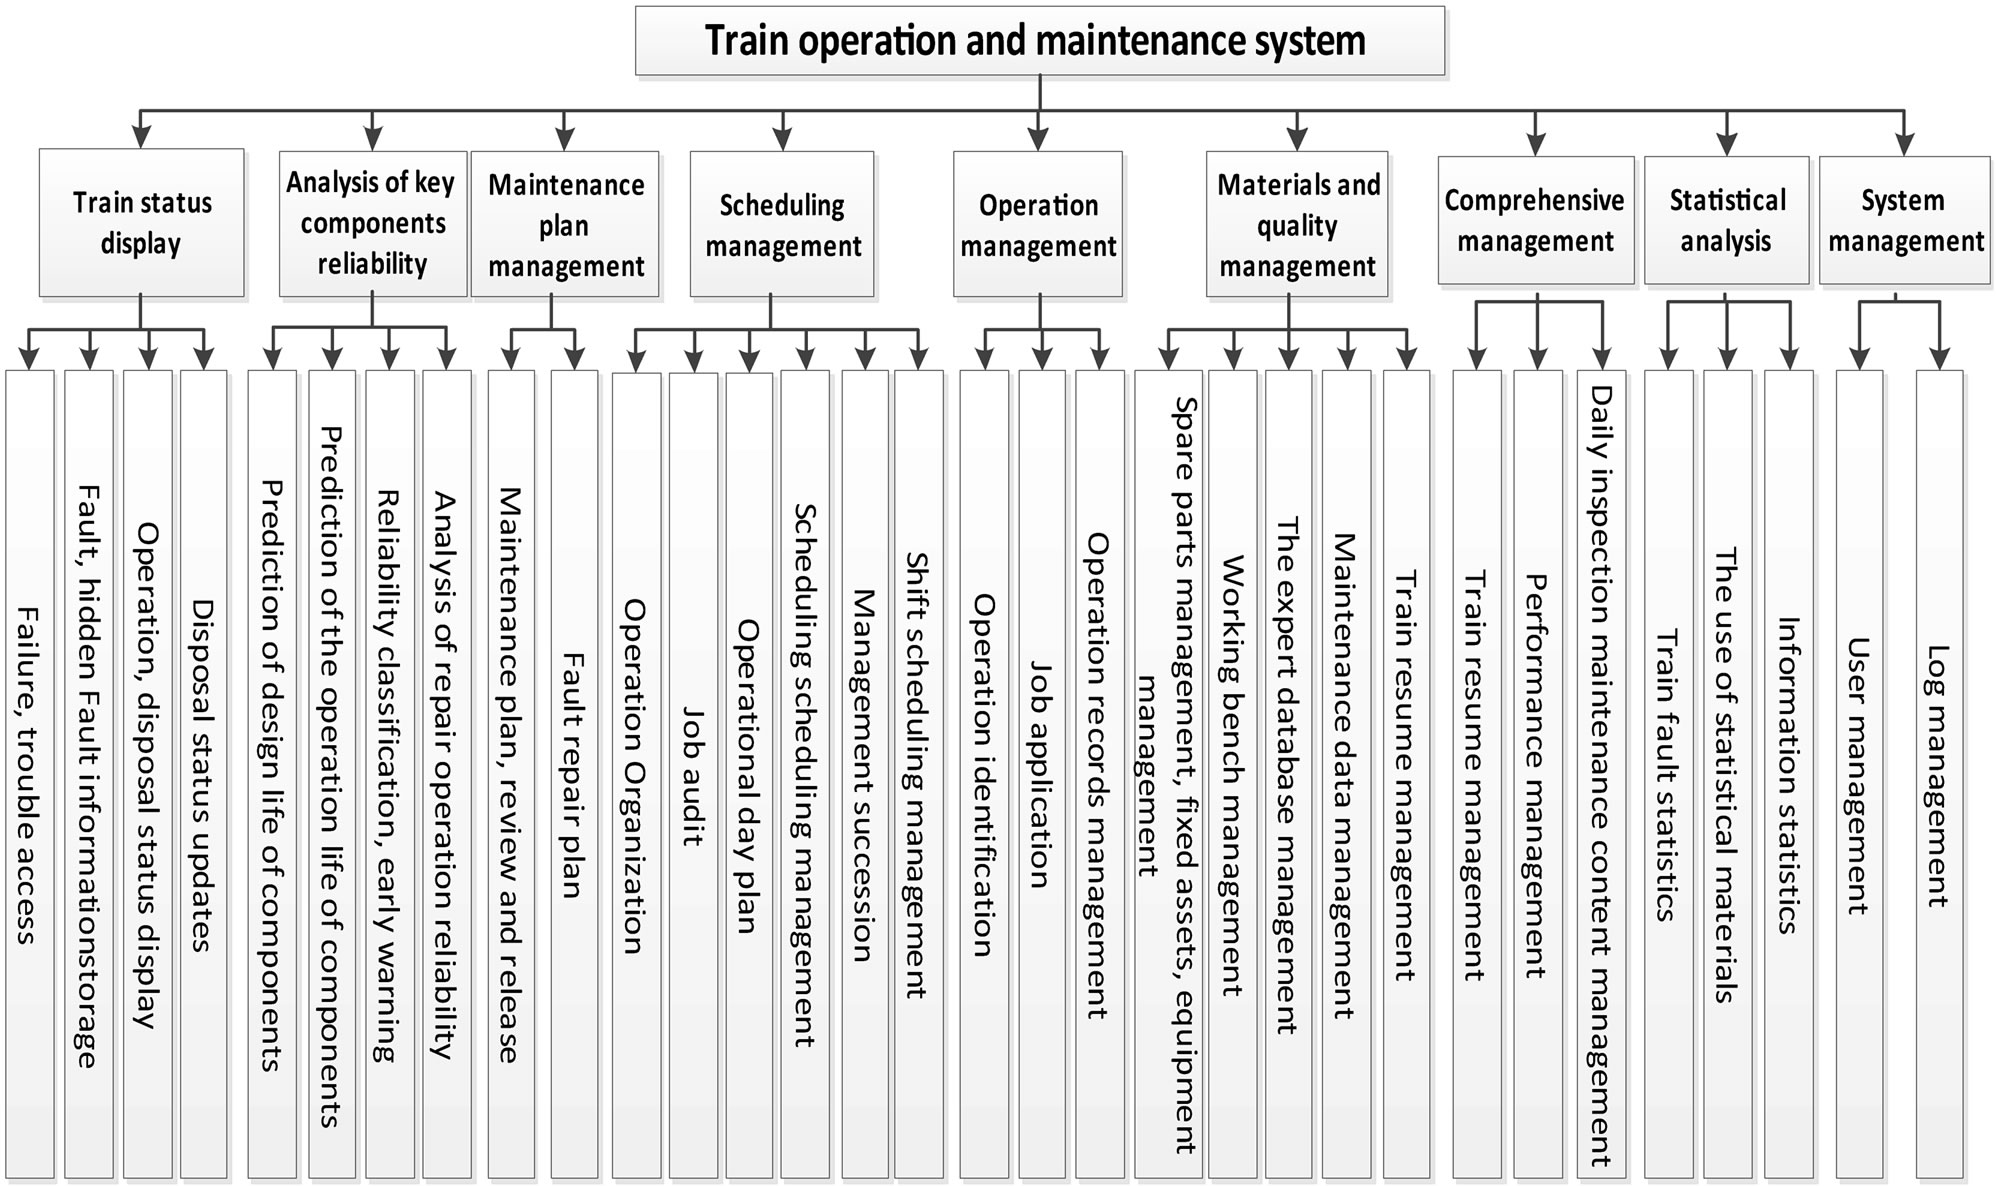 SOMS: A Subway Operation and Maintenance System Based on Planned